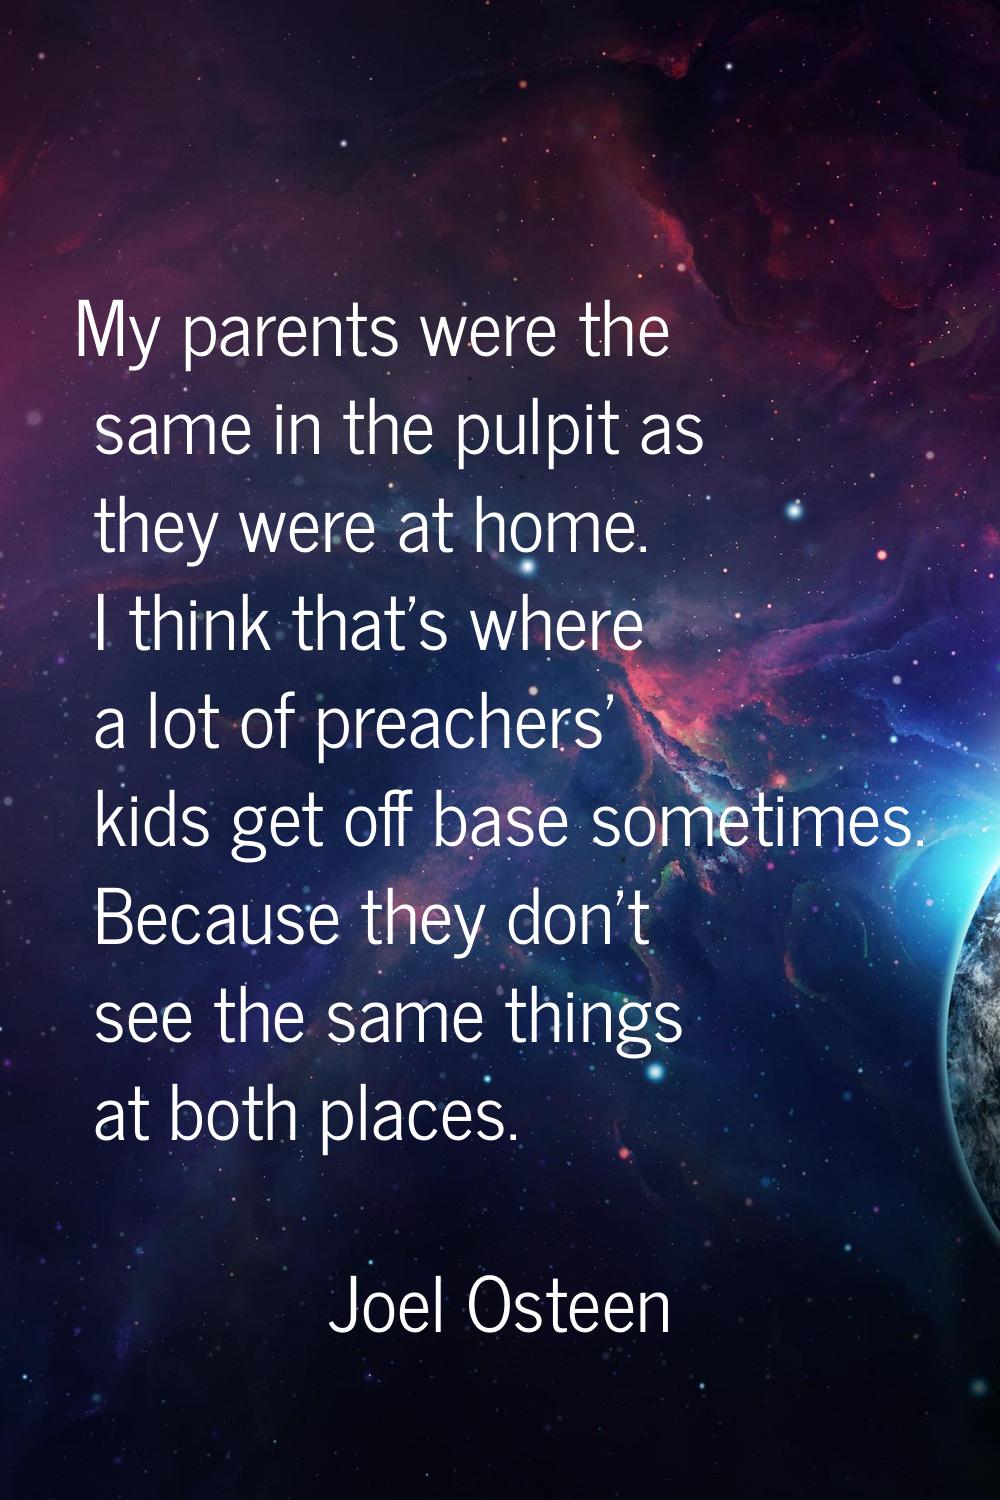 My parents were the same in the pulpit as they were at home. I think that's where a lot of preacher